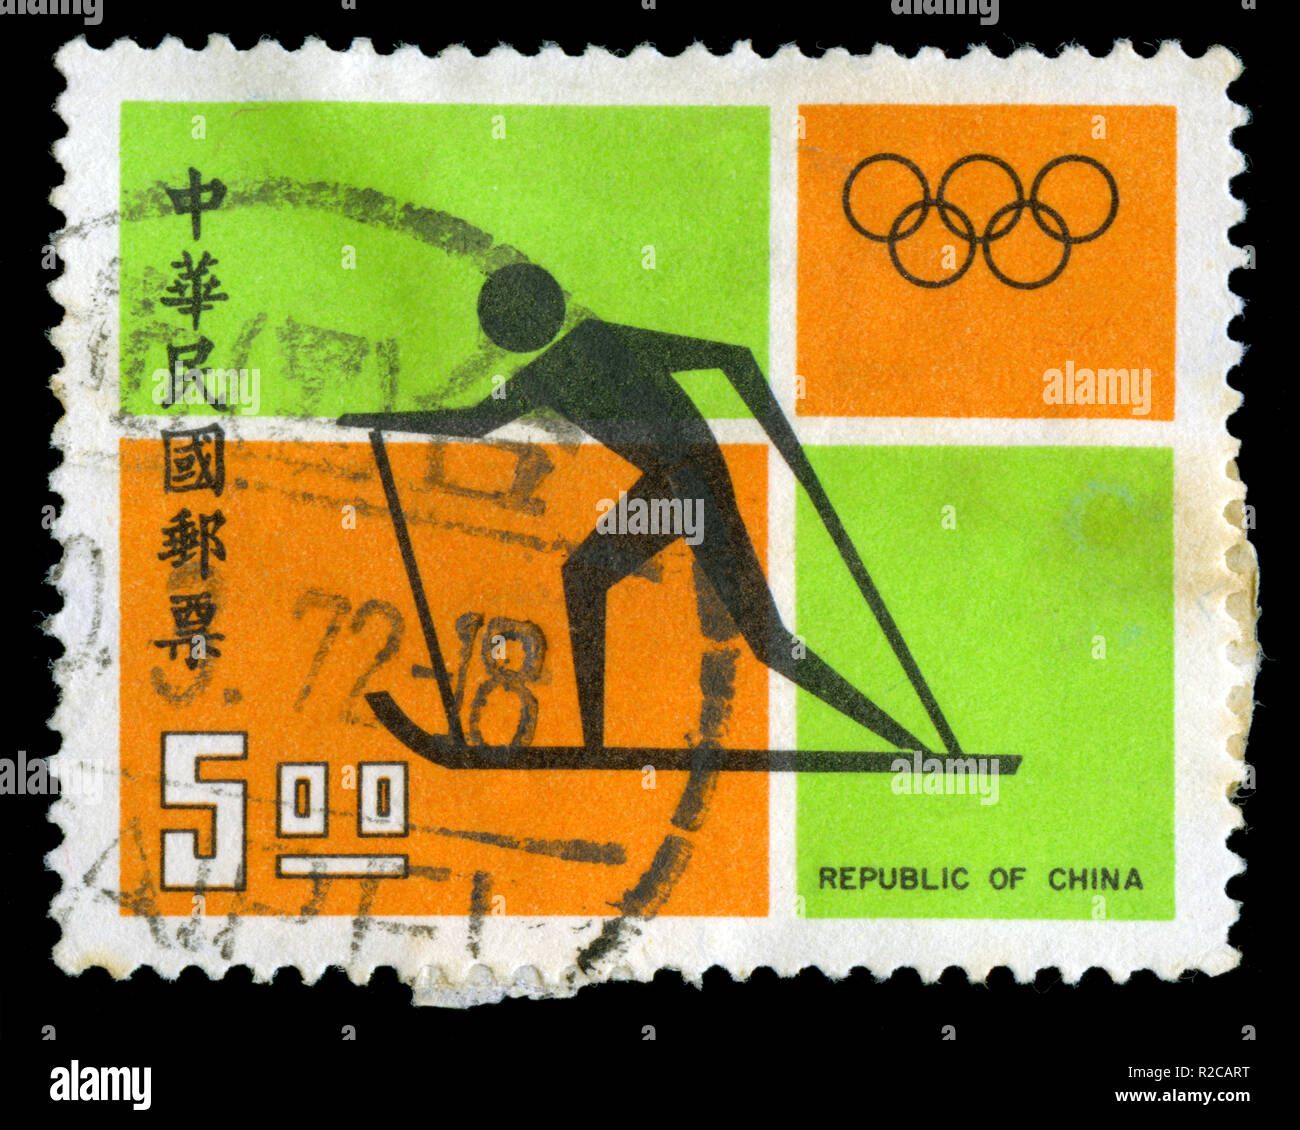 Postmarked stamp from Taiwan in the Sports Postage Stamps (Issue of 1972) Stock Photo